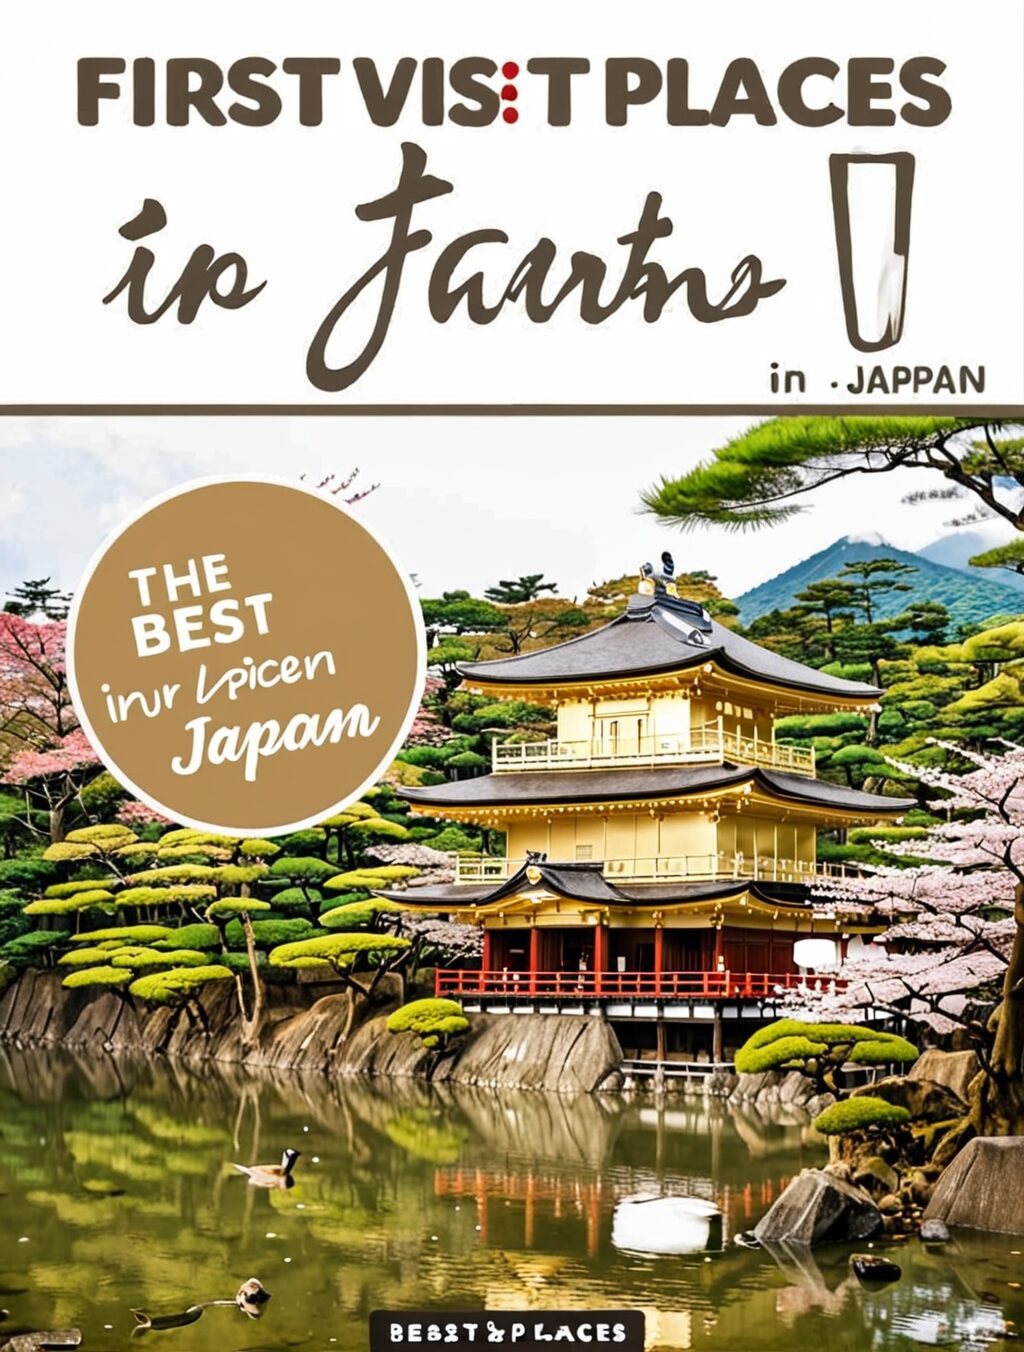 best places to visit in japan for first timers reddit